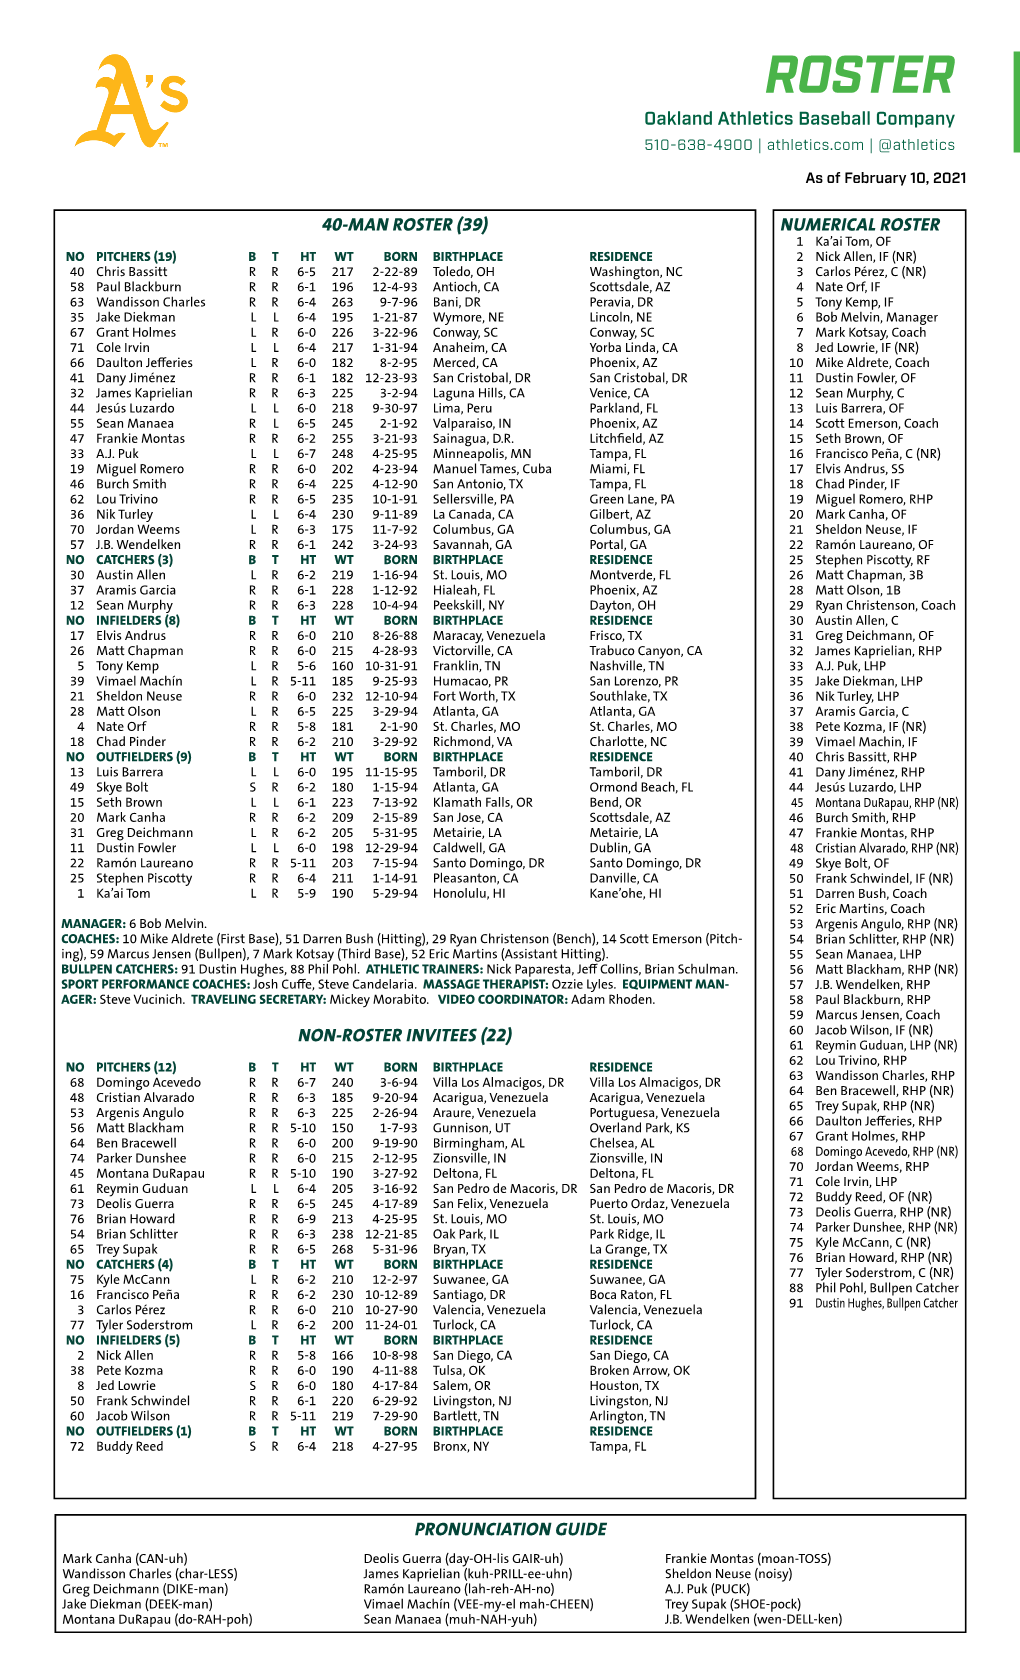 02-10-2021 A's Roster